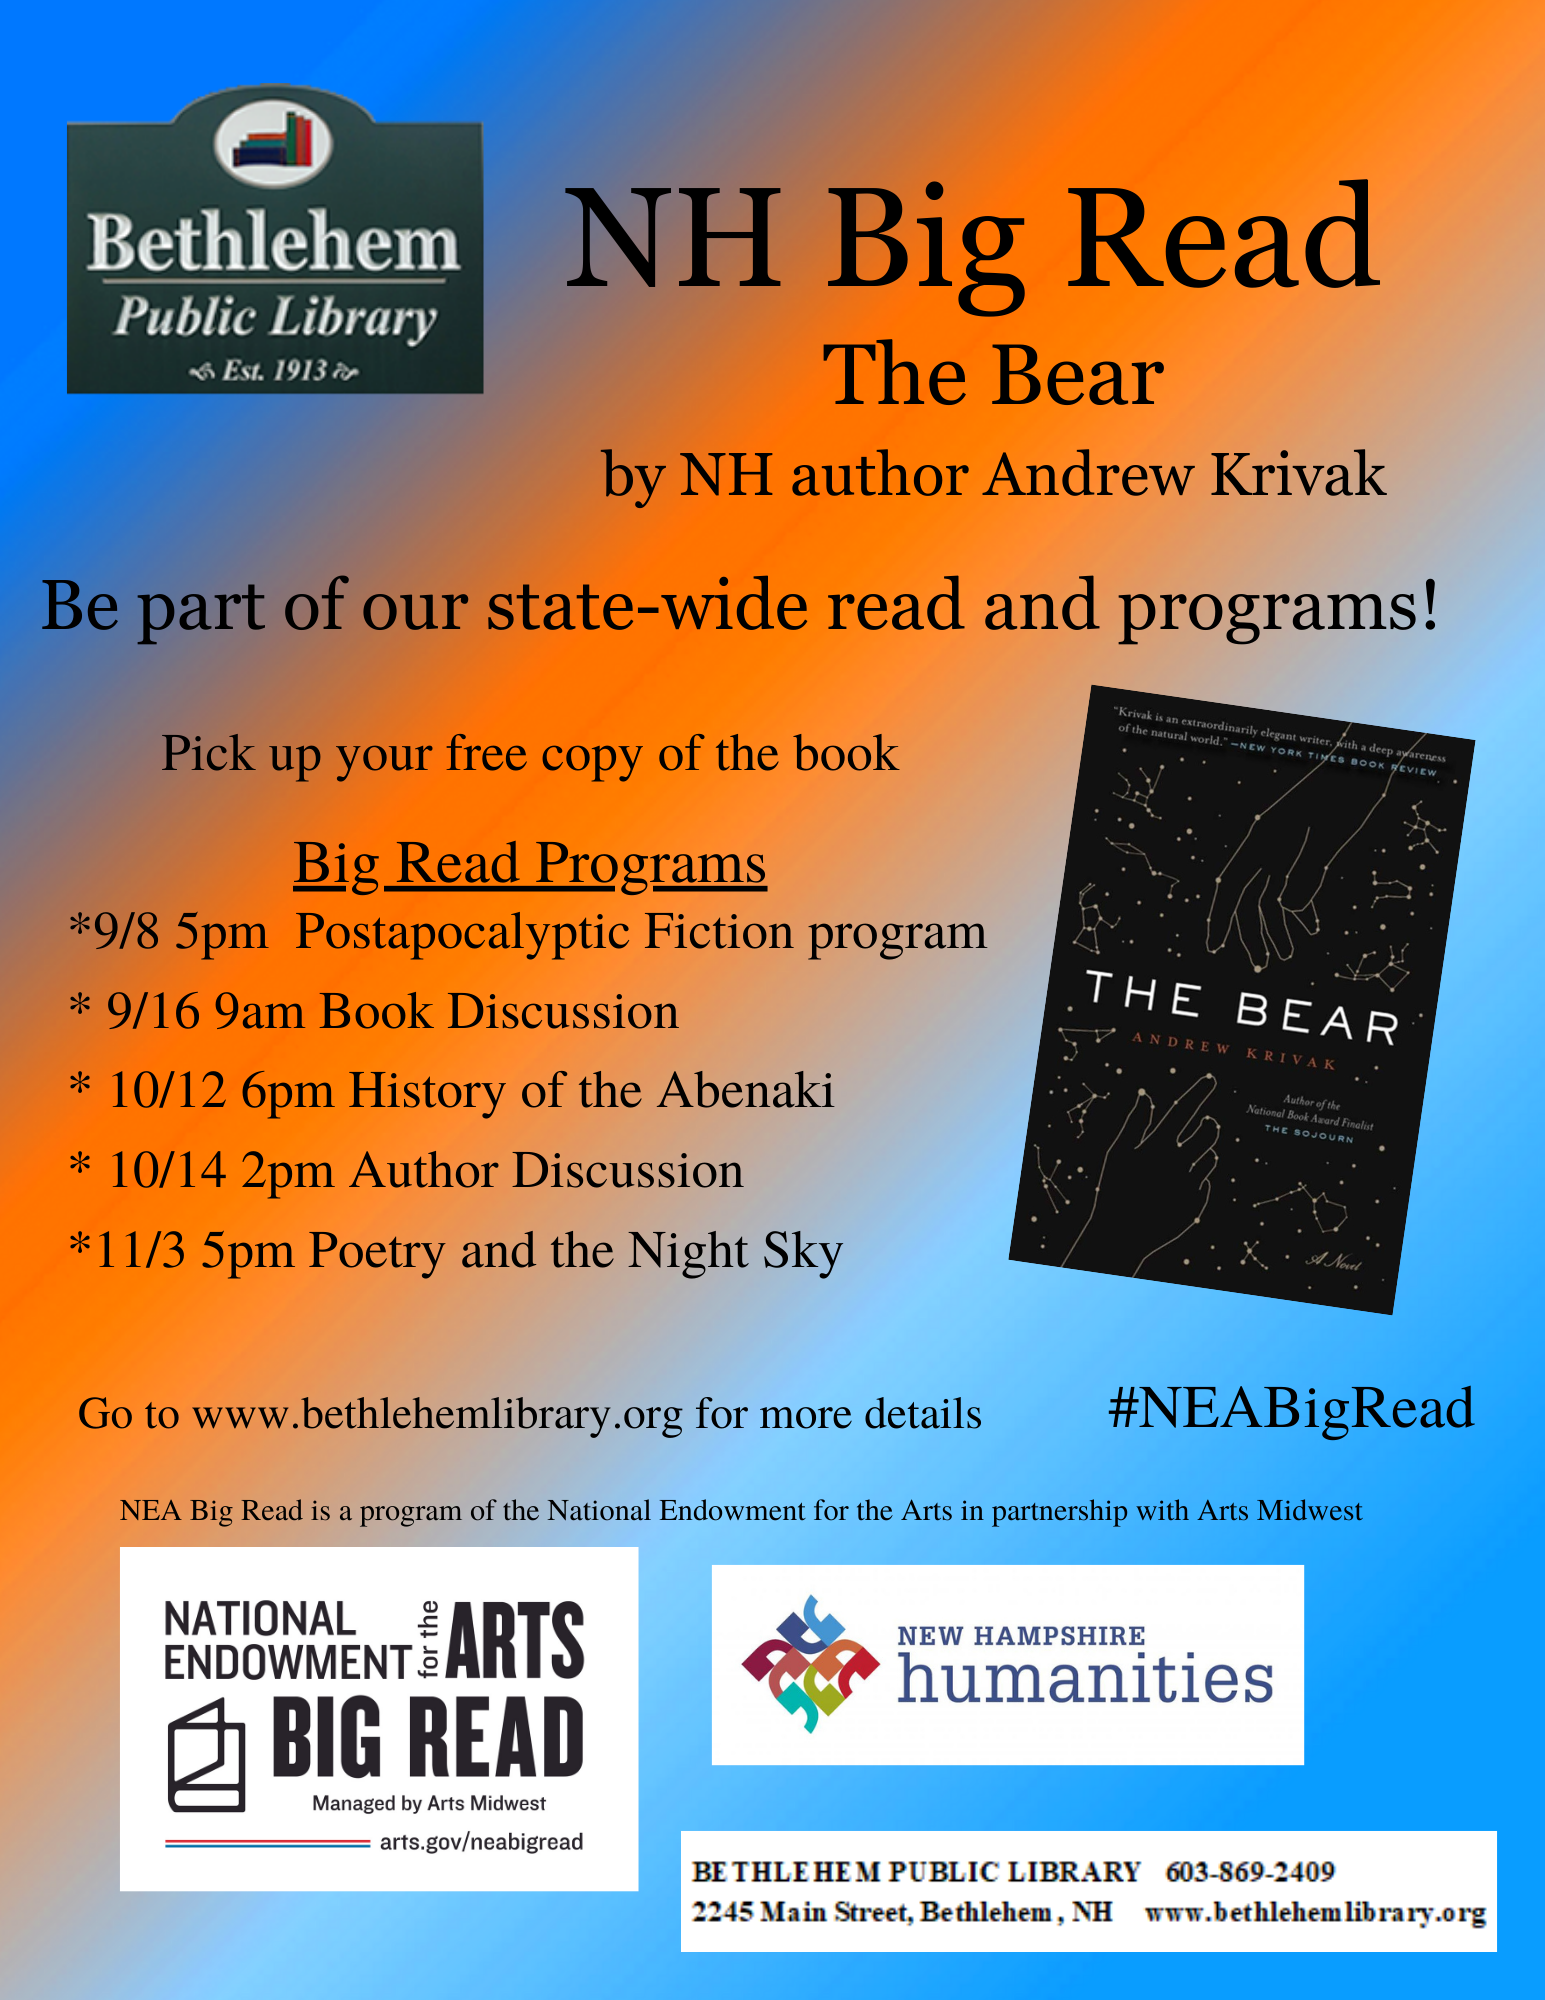 NH Big Read, The Bear by NH author Andrew Krivak.  Be part of our state-wide read and programs!  Pick up your free copy of the book  Big Read Programs *9/8 5pm  Postapocalyptic Fiction program * 9/16 9am Book Discussion * 10/12 6pm History of the Abenaki * 10/14 2pm Author Discussion *11/3 5pm Poetry and the Night Sky.Go to www.bethlehemlibrary.org for more details. NEA Big Read is a program of the National Endowment for the Arts in partnership with Arts Midwes 